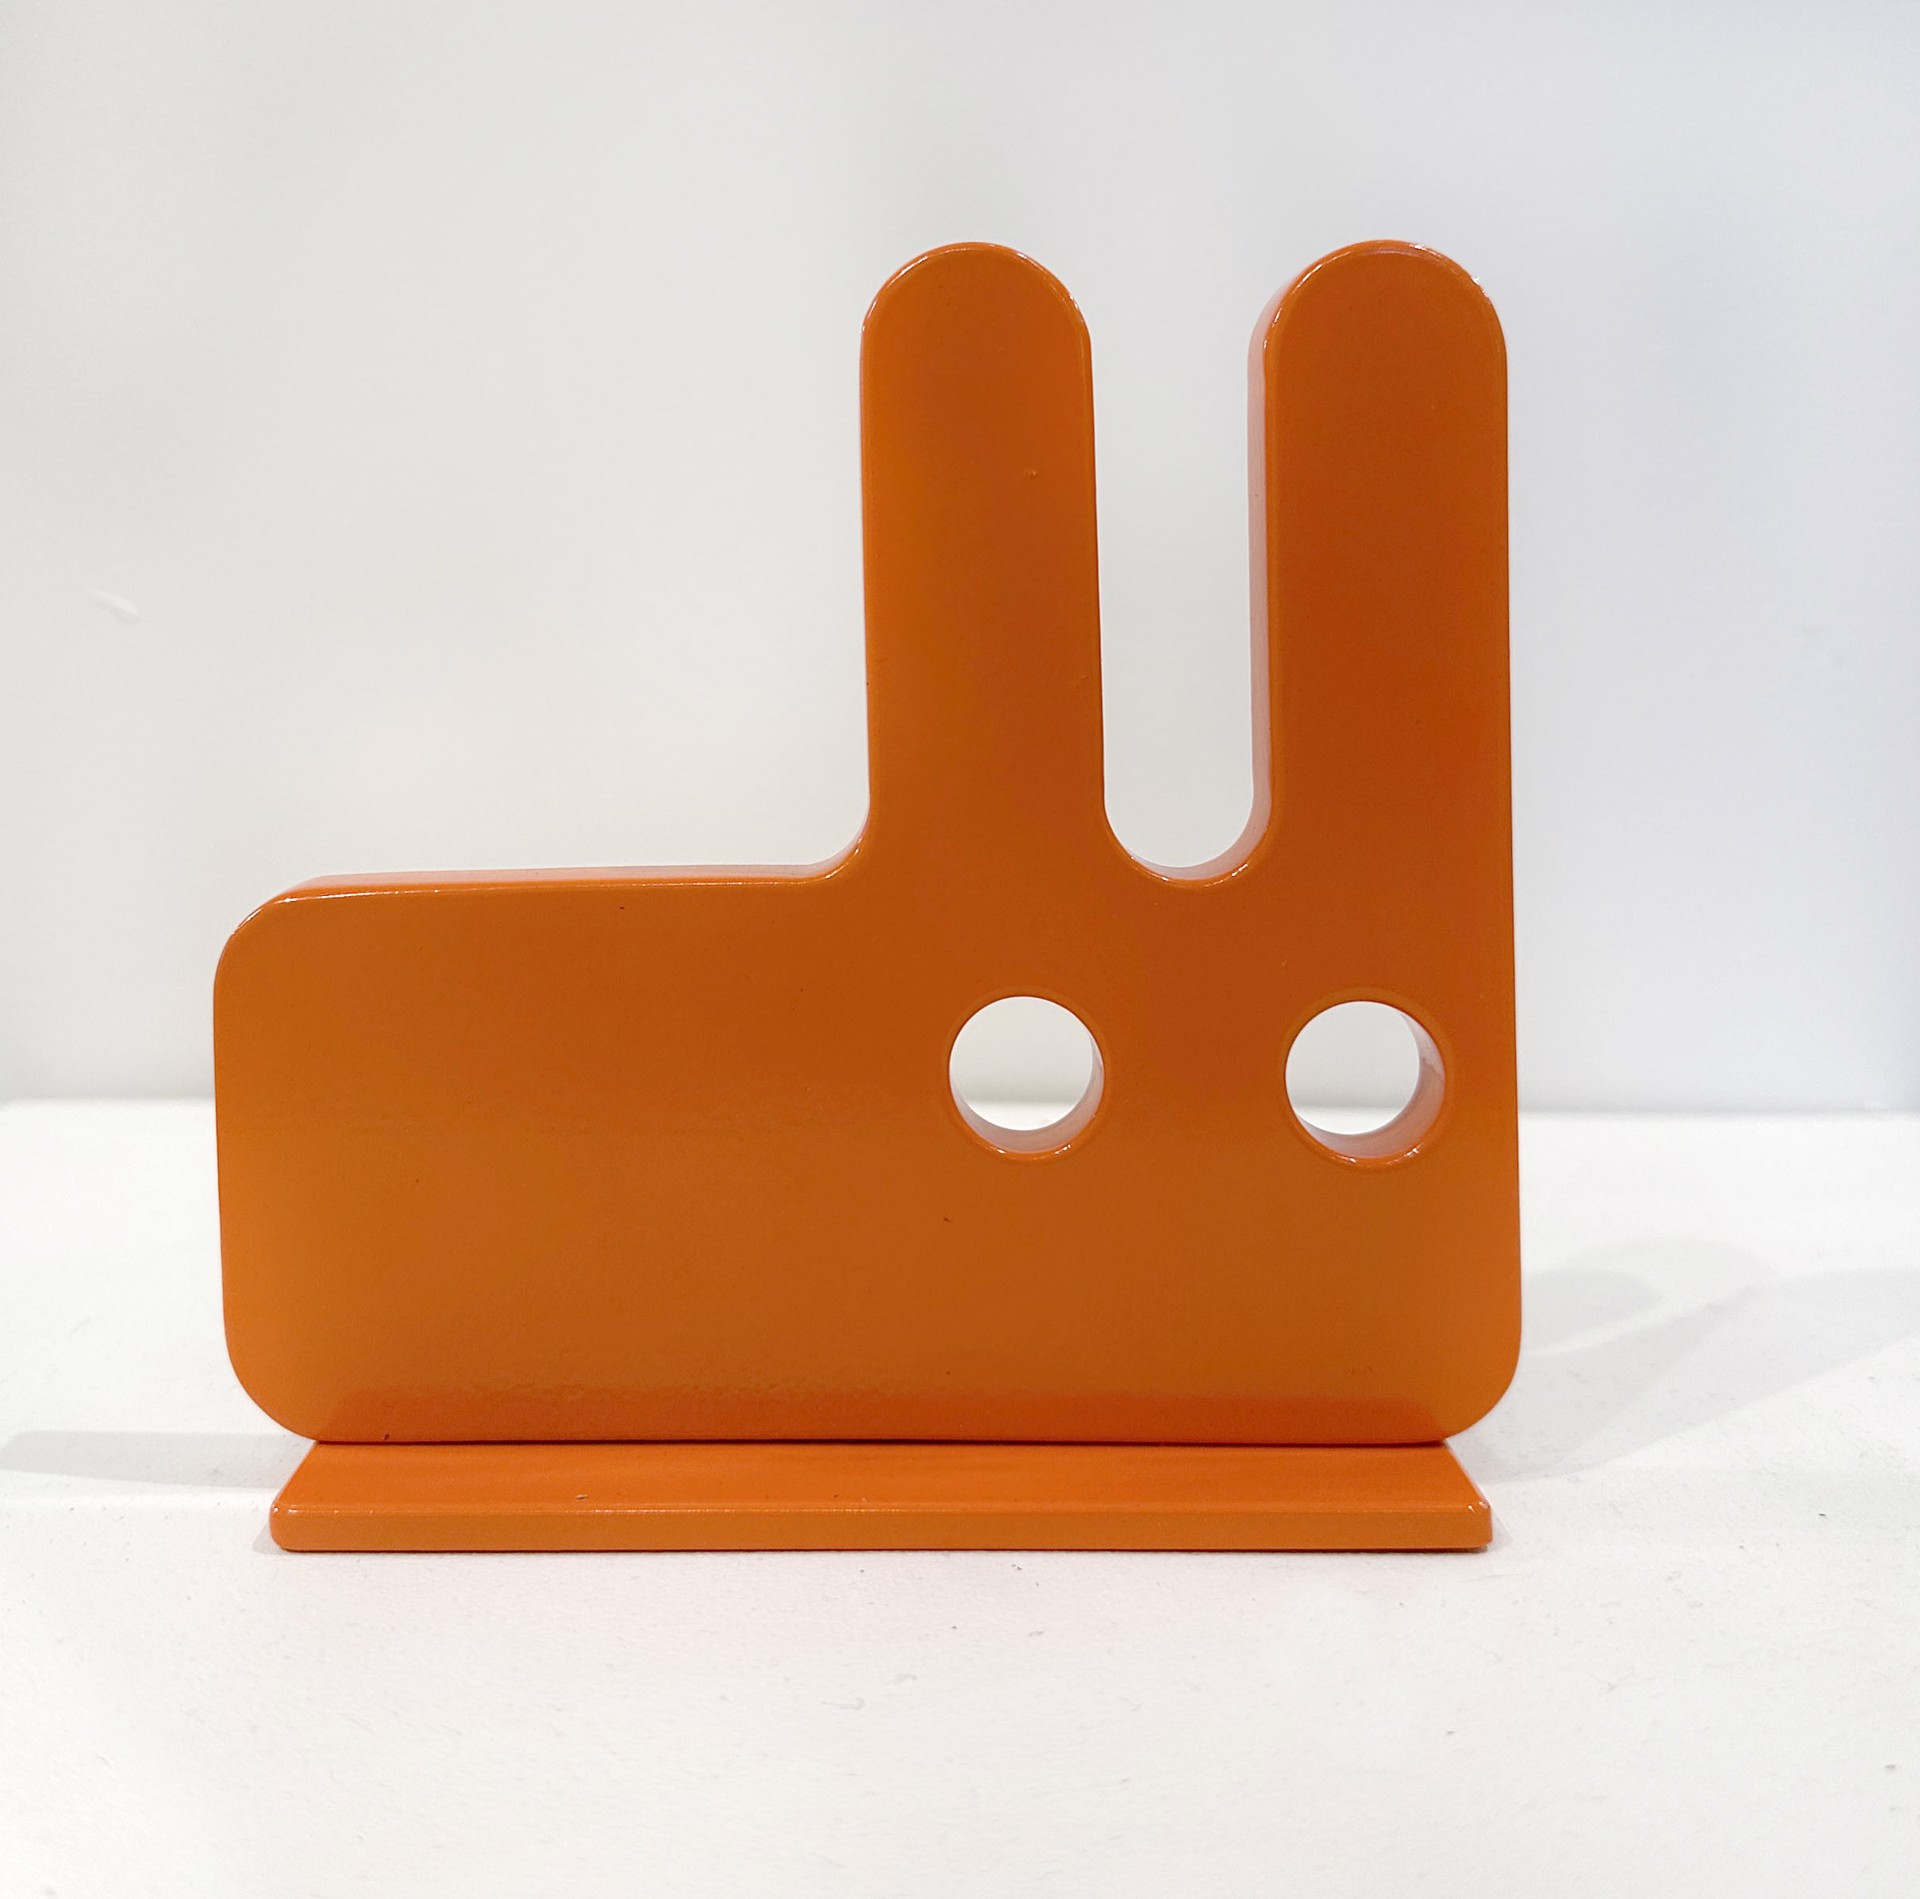 Original Aluminium Sculpture By Jeffie Brewer Featuring An Abstracted Bunny In Green Finish